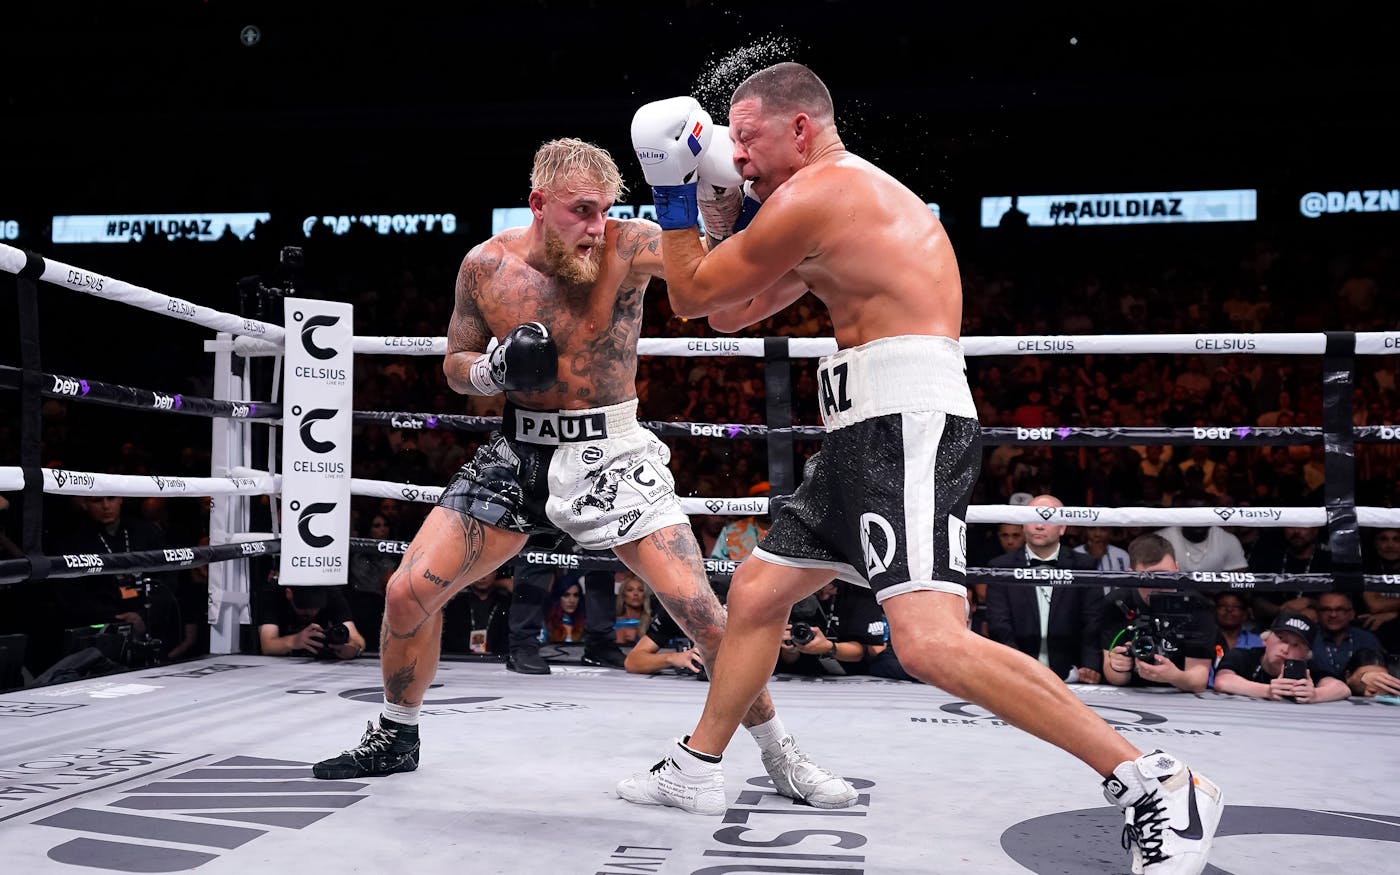 Jake Paul bounces back from 1st loss with unanimous decision win over Nate  Diaz